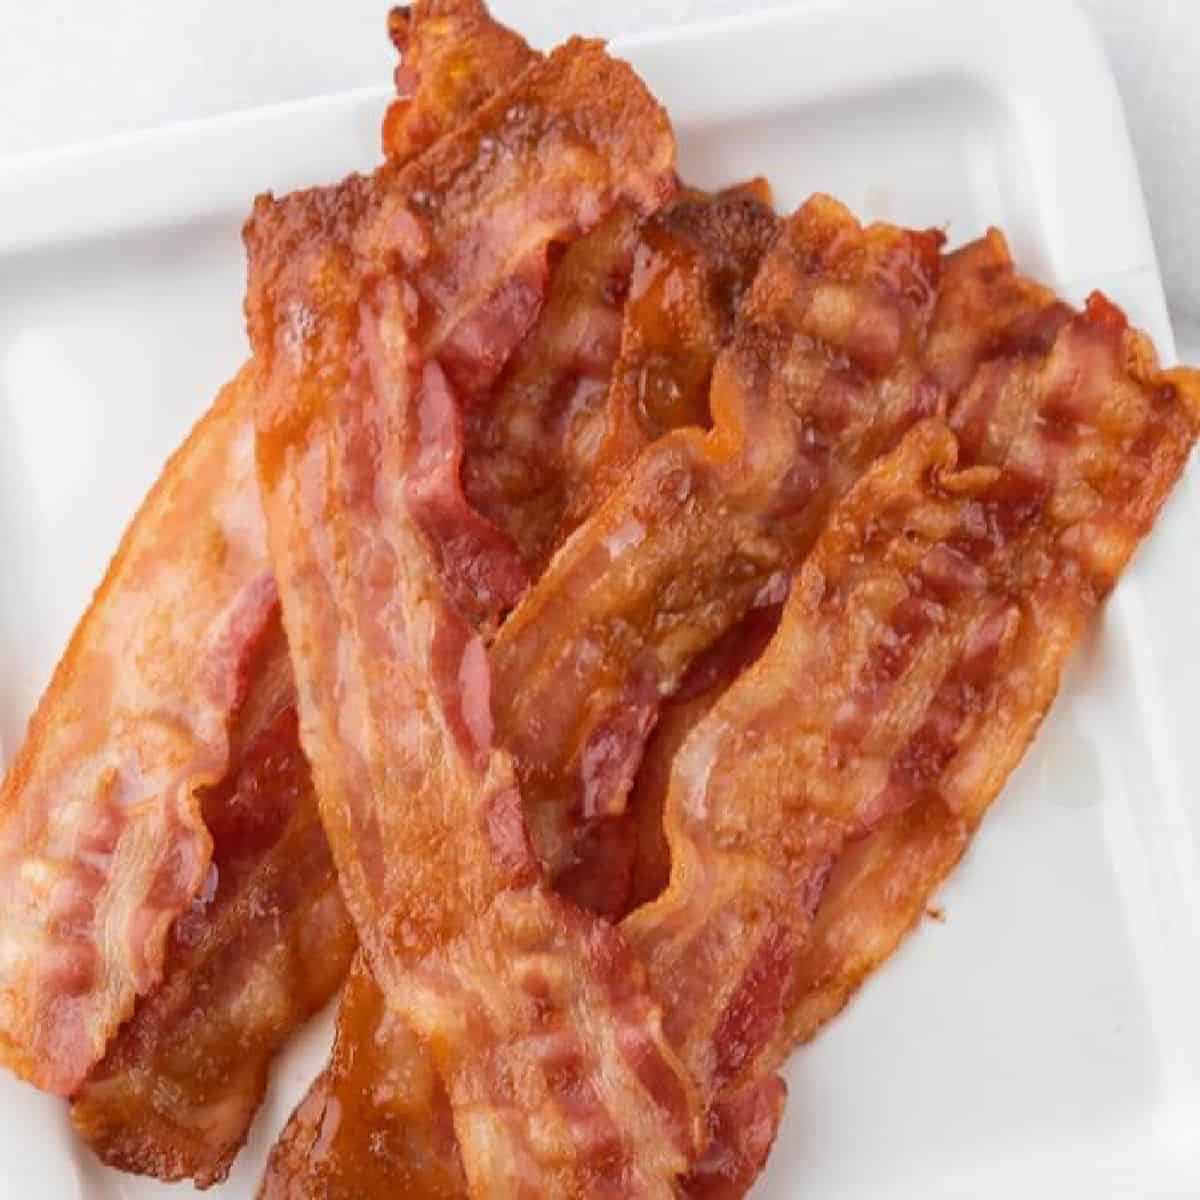 cooked bacon slices on plate